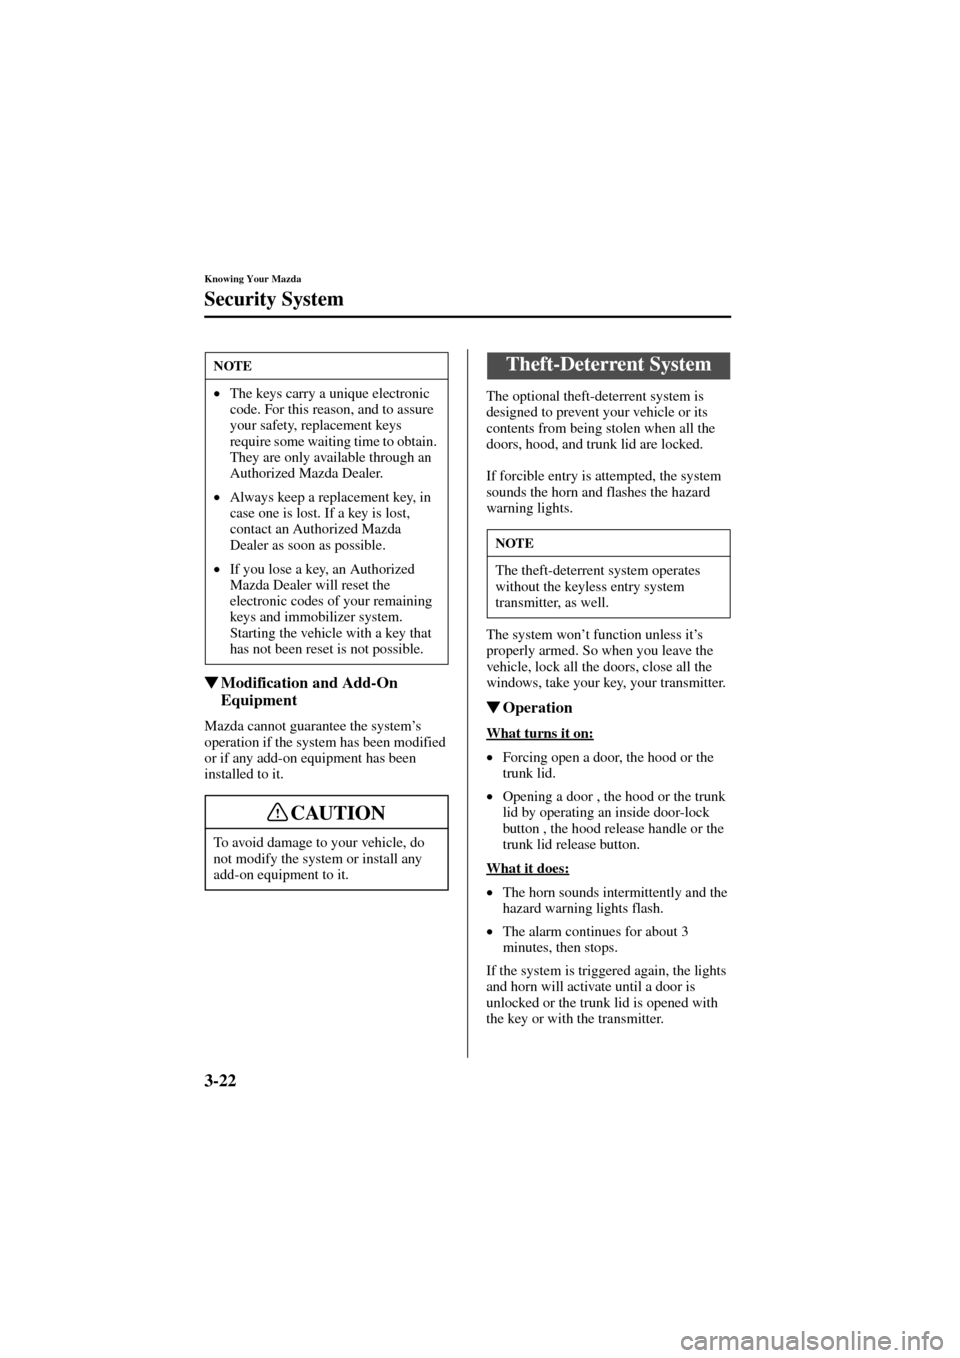 MAZDA MODEL 6 2004  Owners Manual (in English) 3-22
Knowing Your Mazda
Security System
Form No. 8R29-EA-02I
Modification and Add-On 
Equipment
Mazda cannot guarantee the system’s 
operation if the system has been modified 
or if any add-on equi